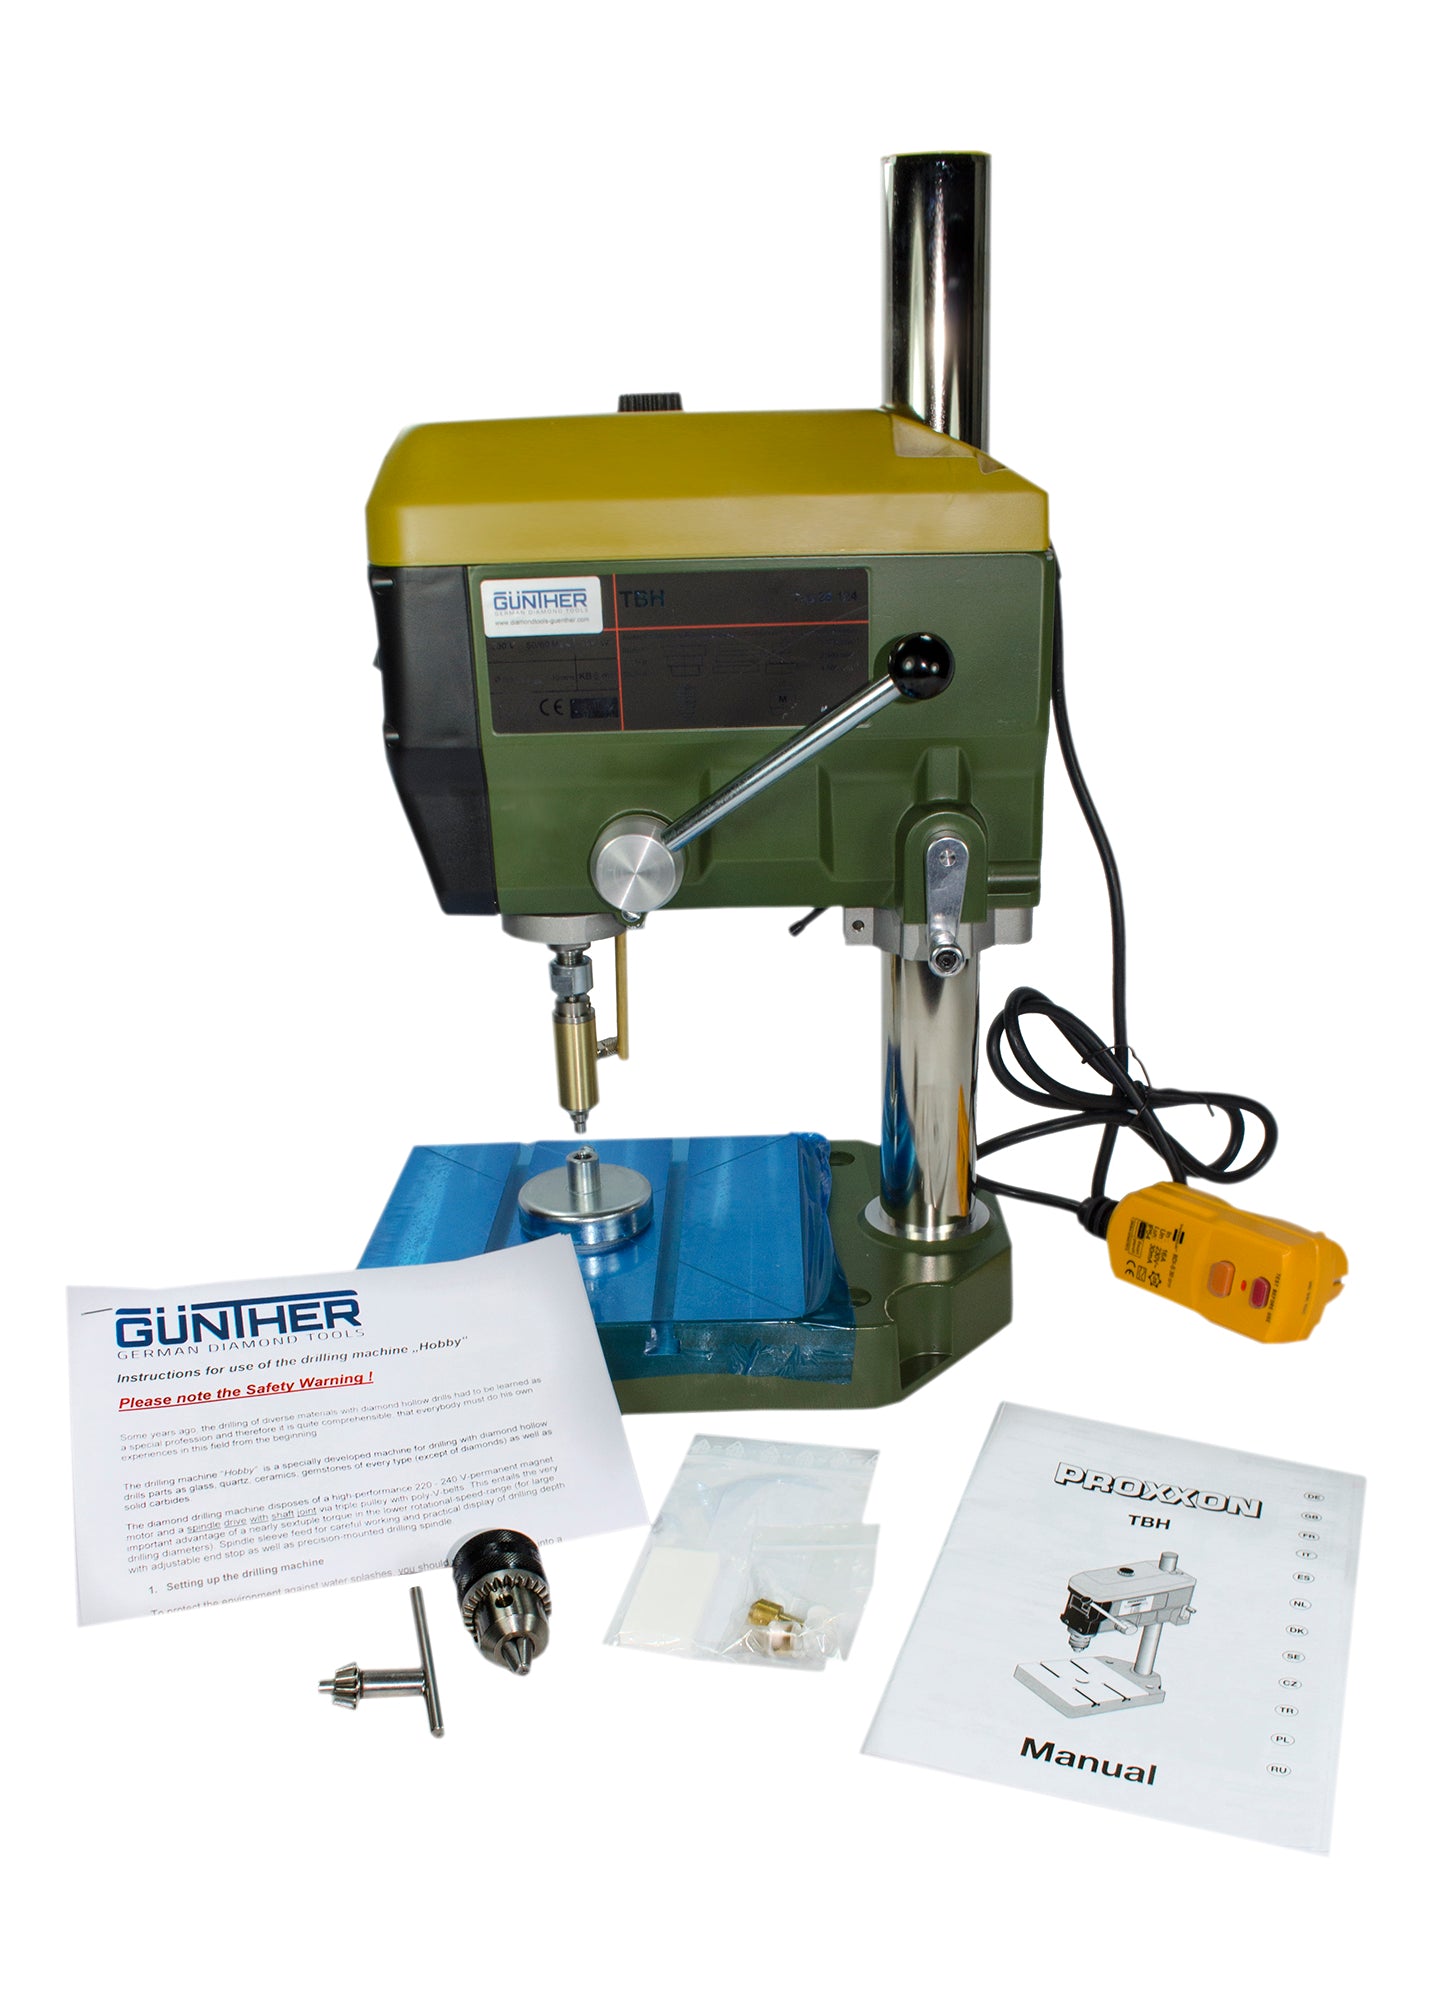 If You are Ever in Tucson, stop by to See a Gunther Diamond Tools Demo and Meet the Staff